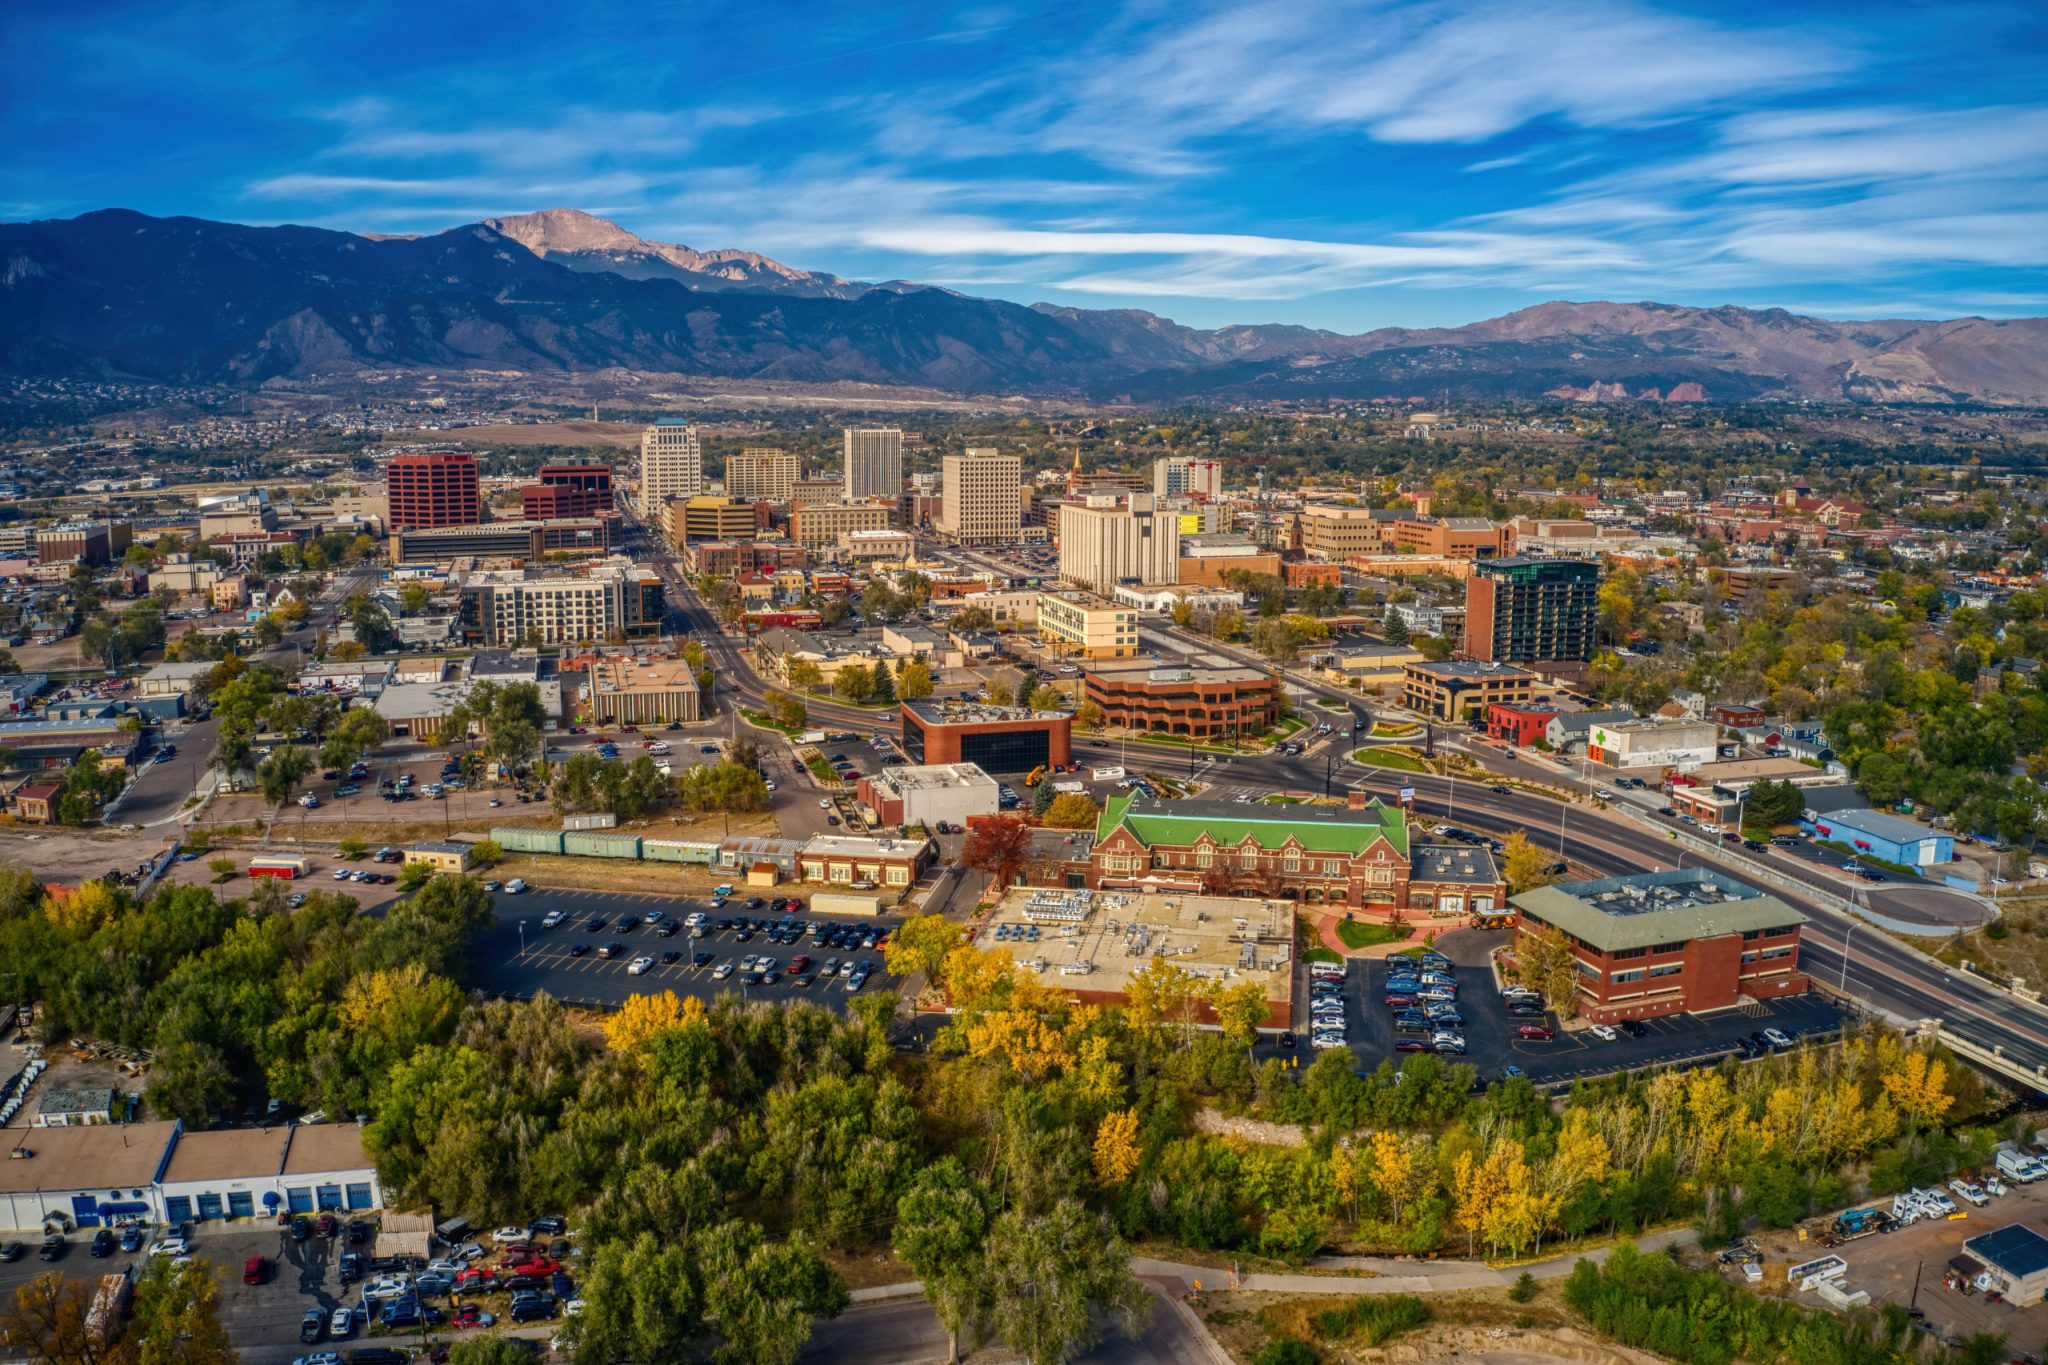 Harner asks (and answers): “What is the essence of Colorado Springs